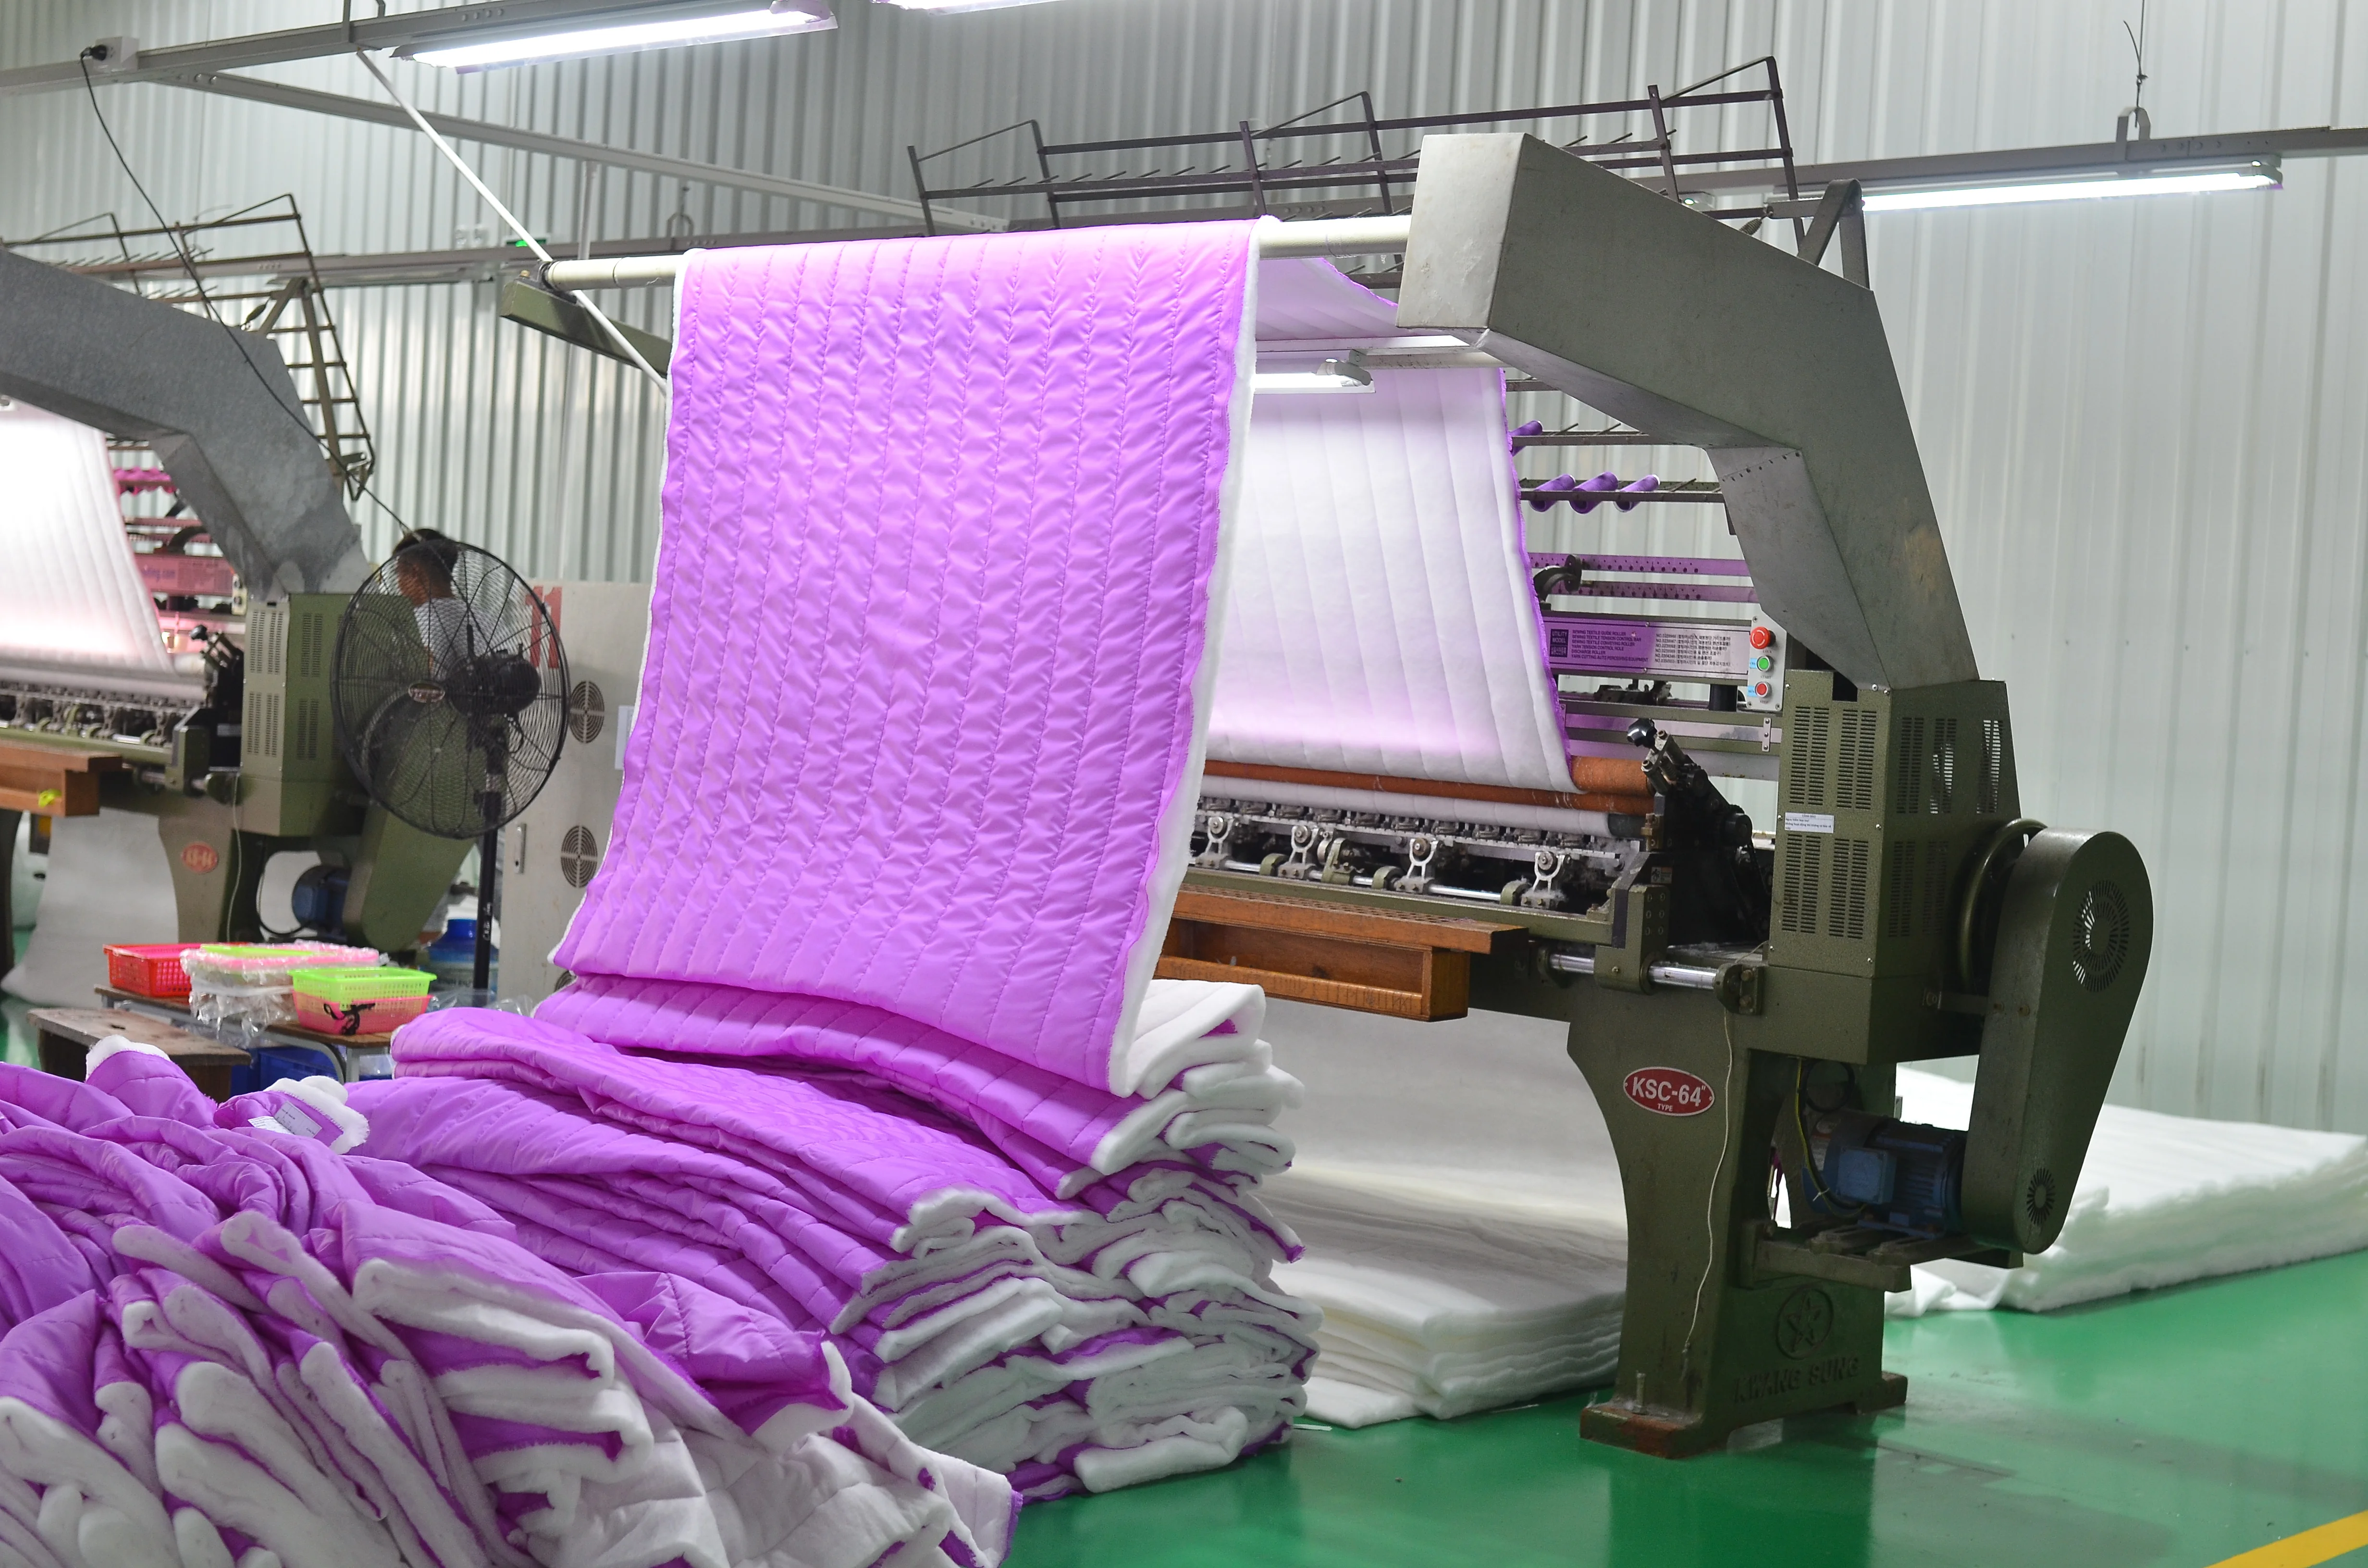 
Hot OEM Polyester material batting Batting Quilted Fabric for Apparel Manufacturing 